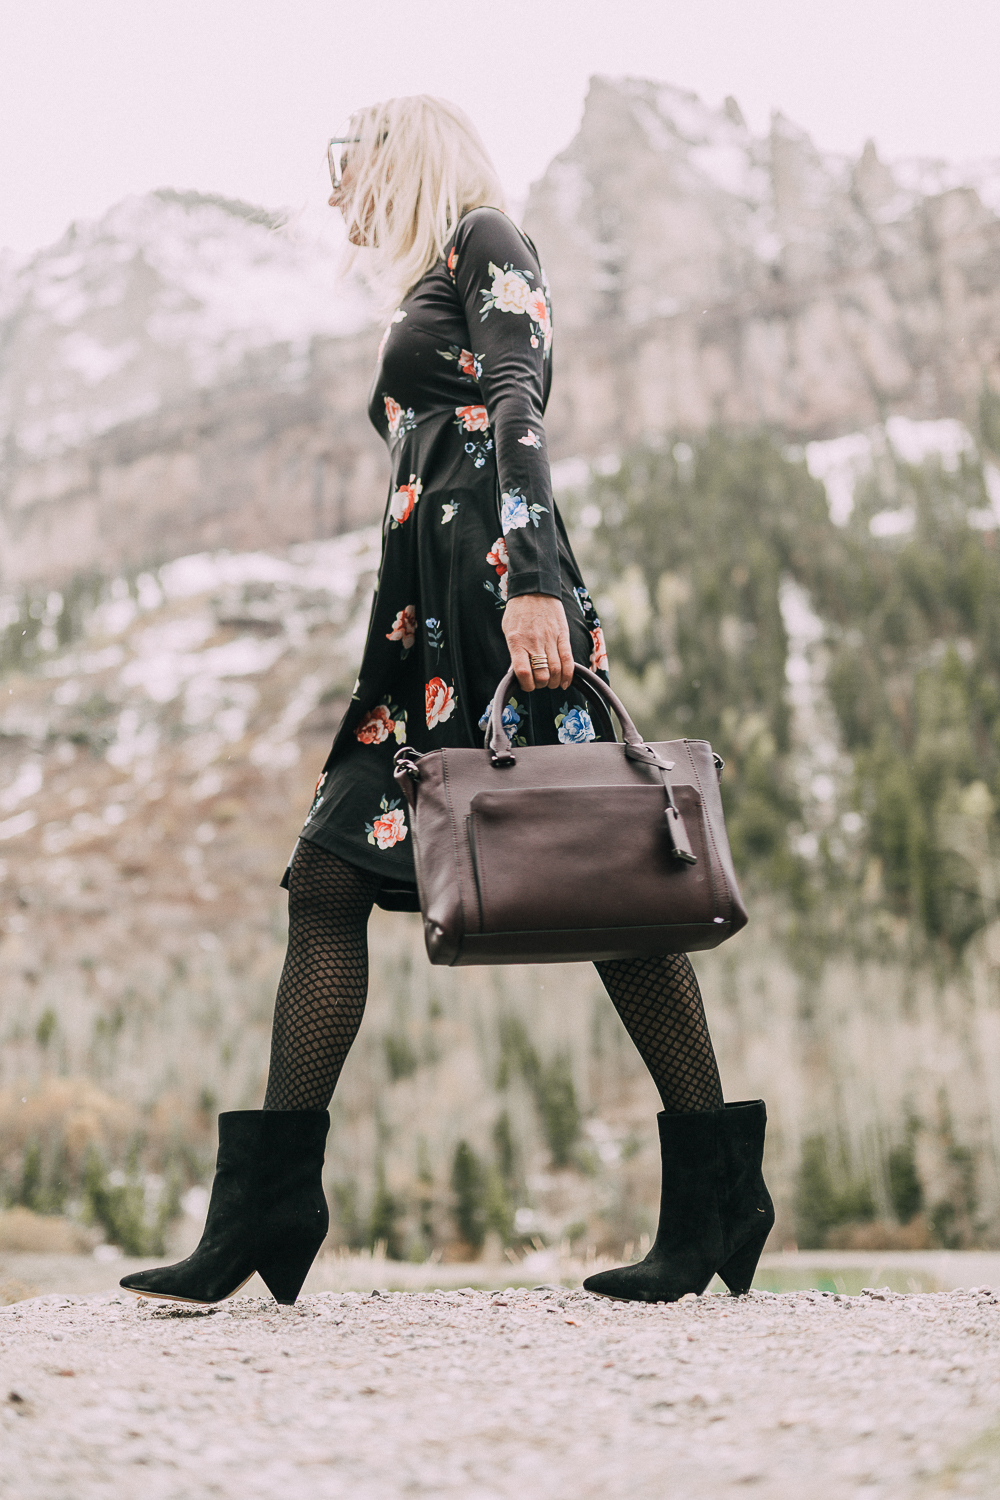 blond woman wearing black vince camuto regina Suede Booties paired with black floral print dress carrying burgundy tote bag with rocky mountains background